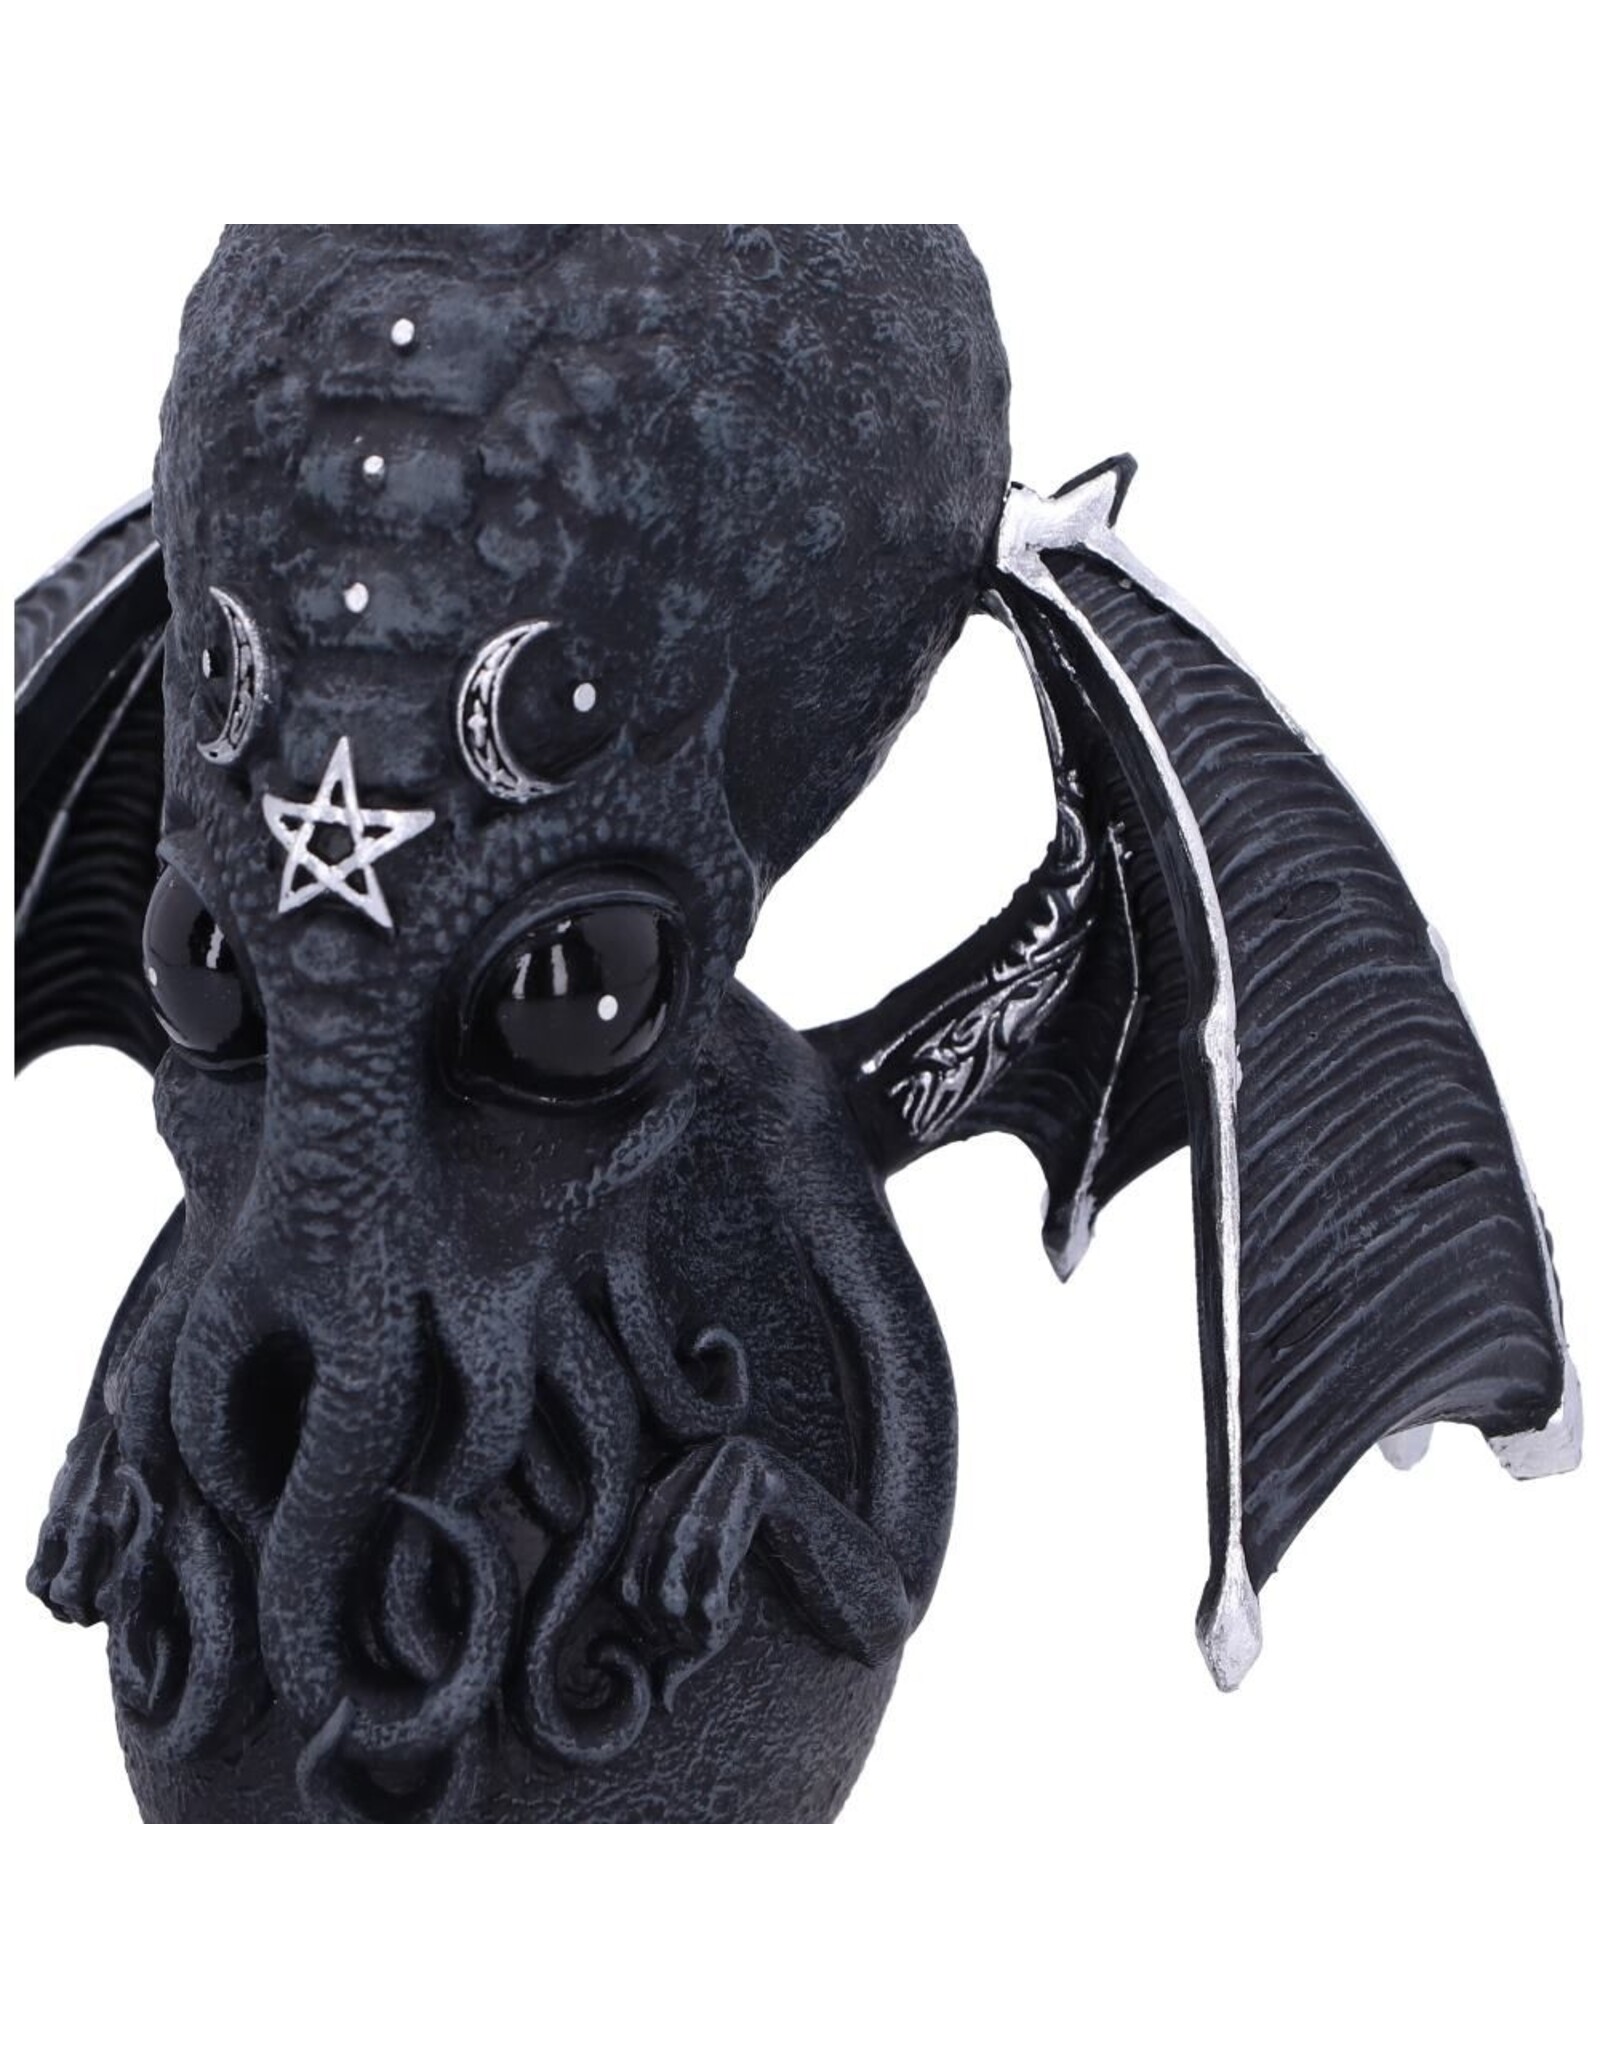 NemesisNow Giftware & Lifestyle - Cult Cuties Culthulhu Small 10.3cm - Nemesis Now